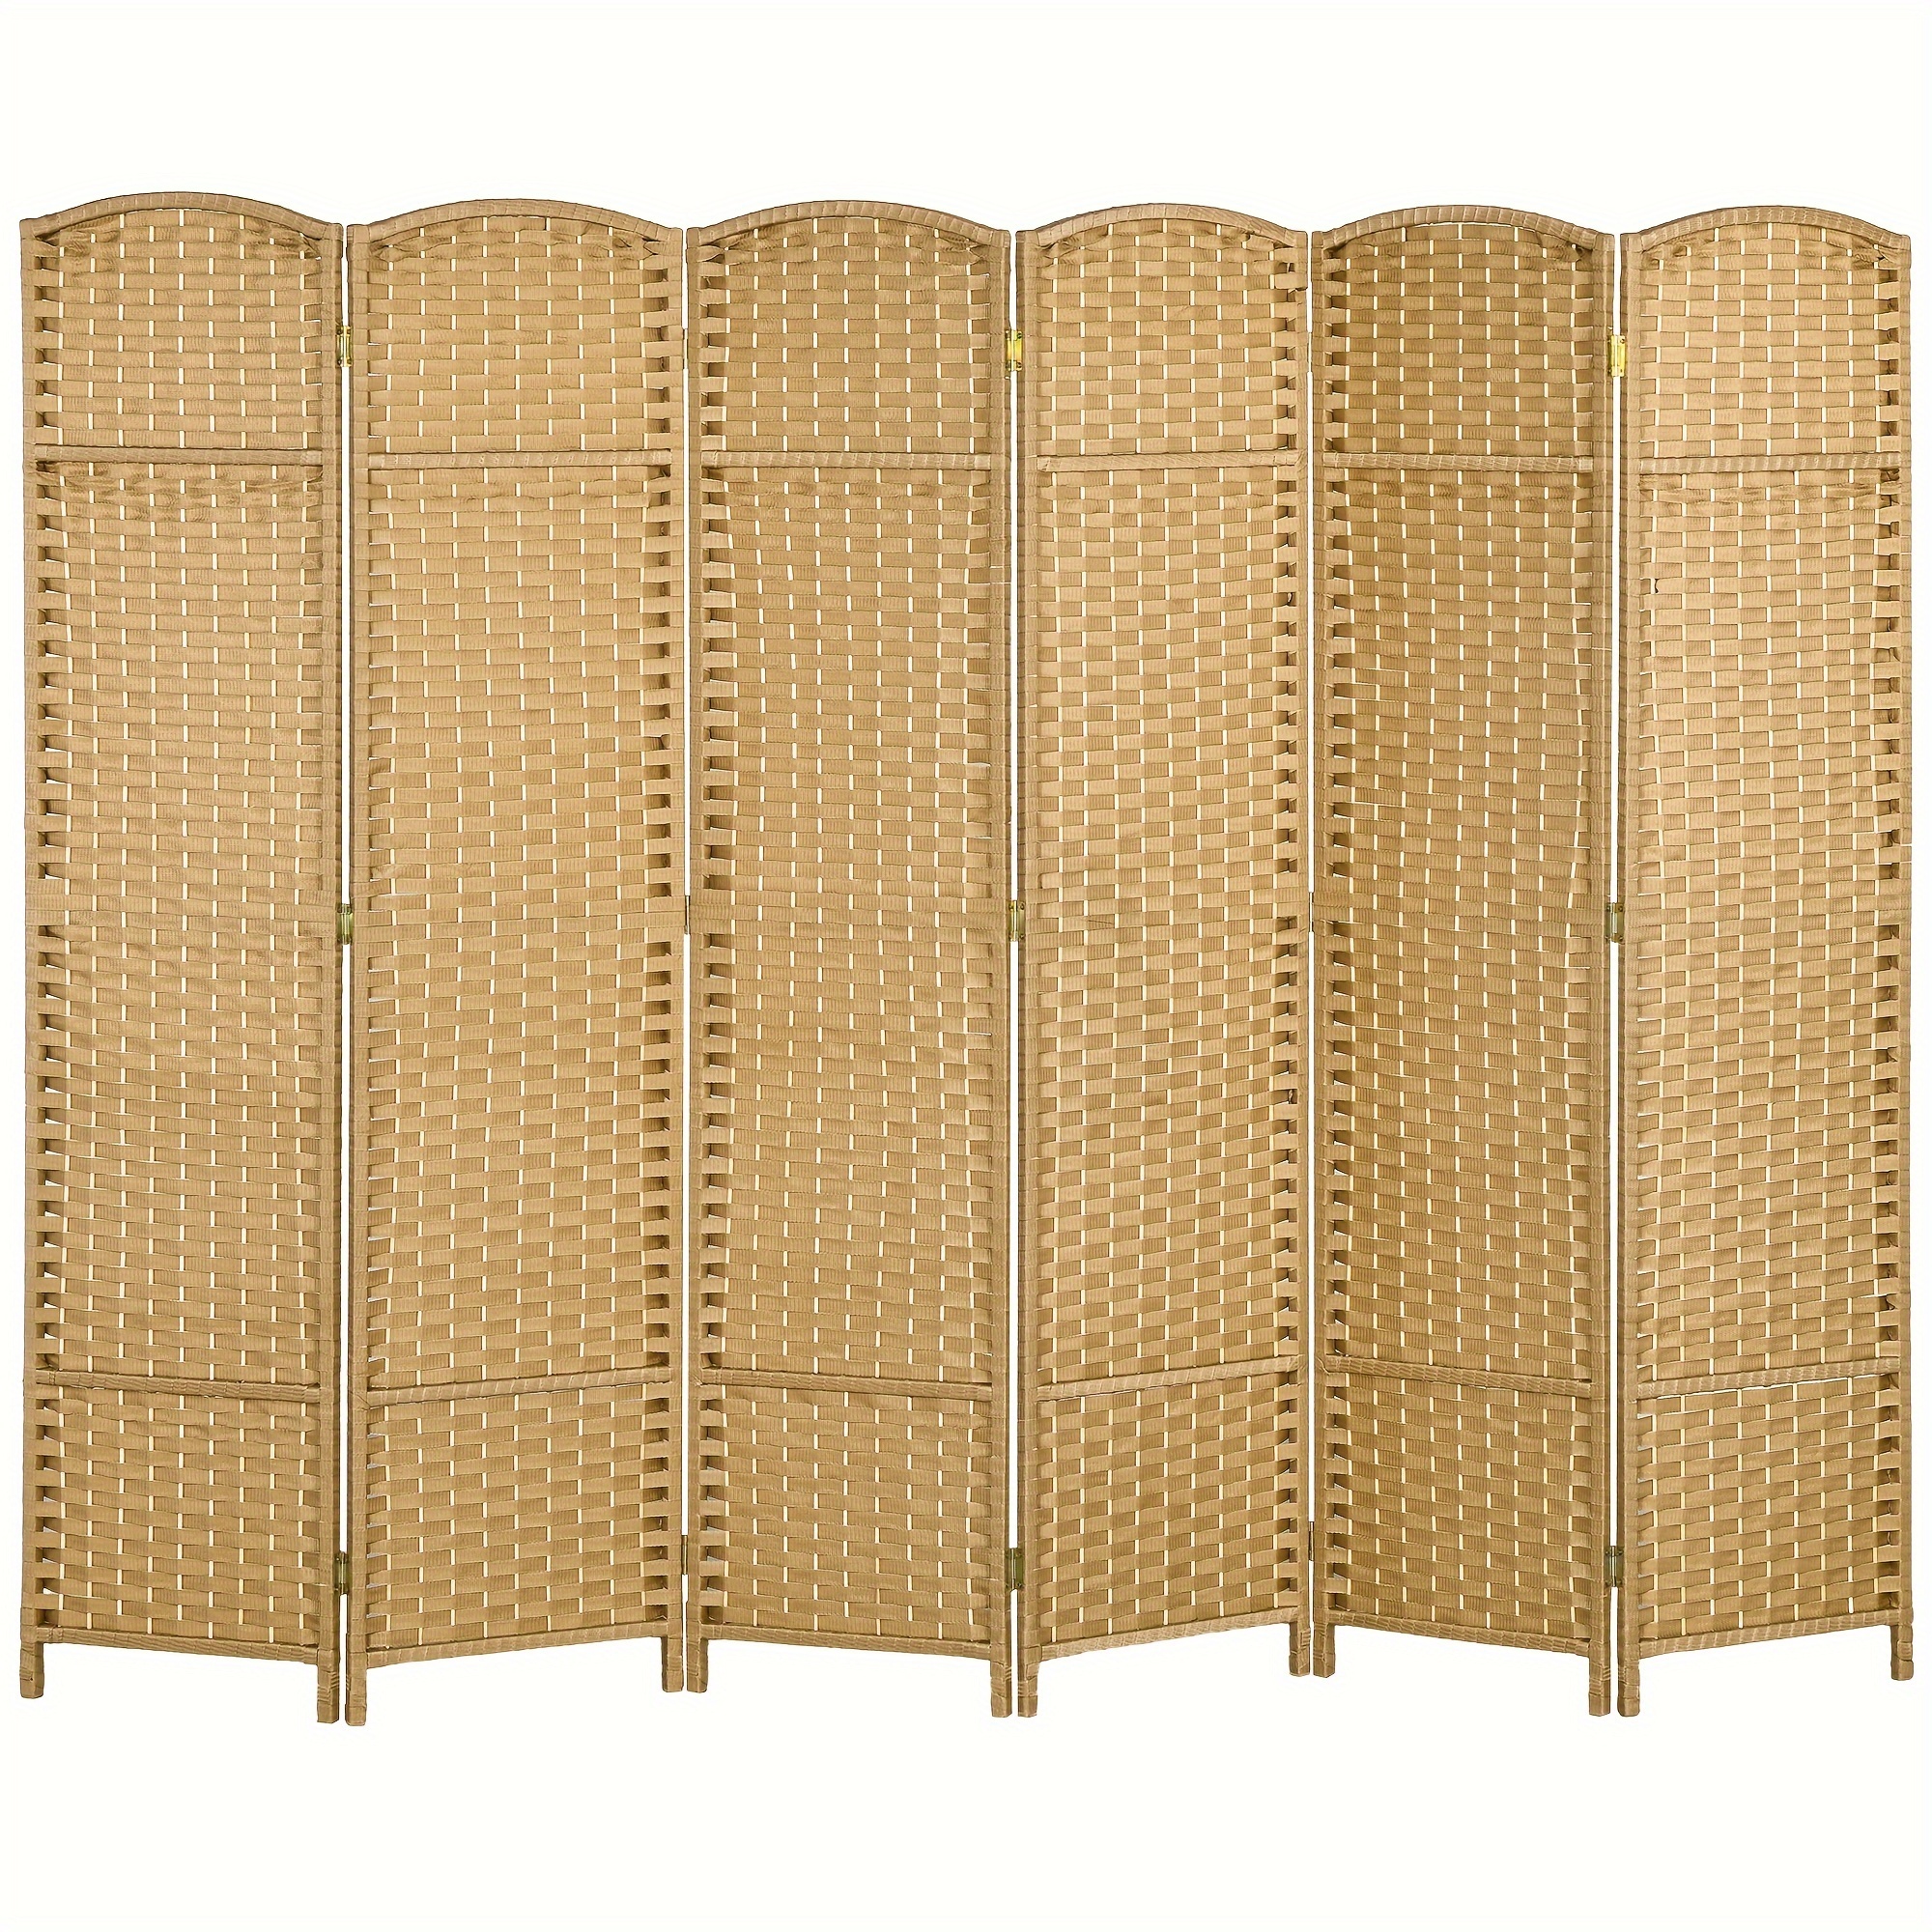 

Homcom Room Divider, 6 Panel Folding Privacy Screen, 5.6' Tall Freestanding Wall Partition For Home Office, Bedroom, Nature Wood